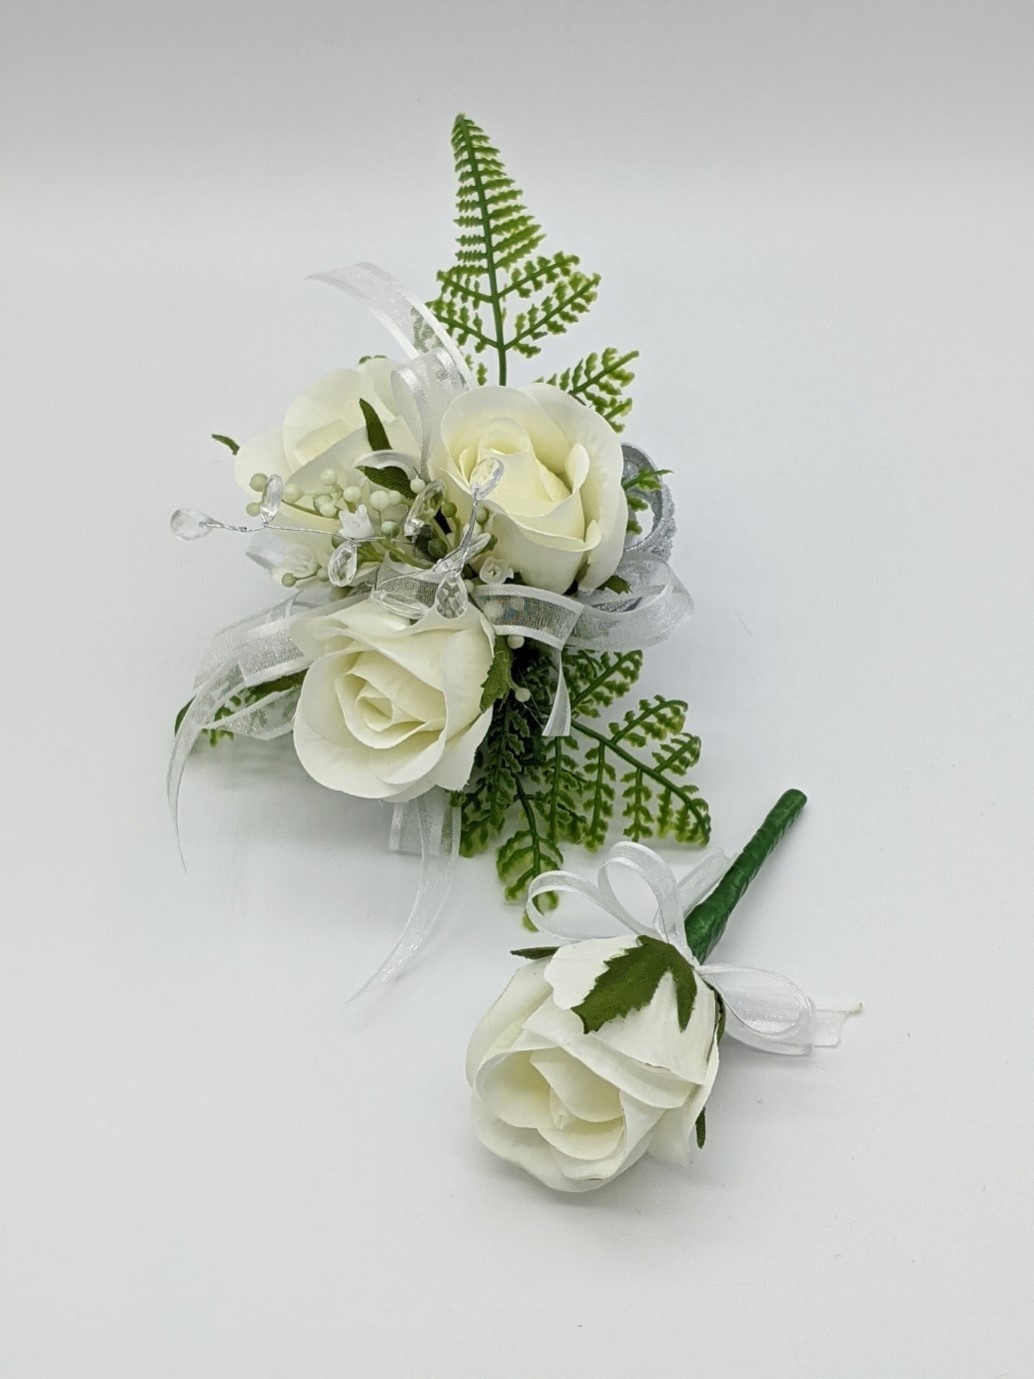 White Roses surrounded by Green Ferns centred with glass bead spray ...